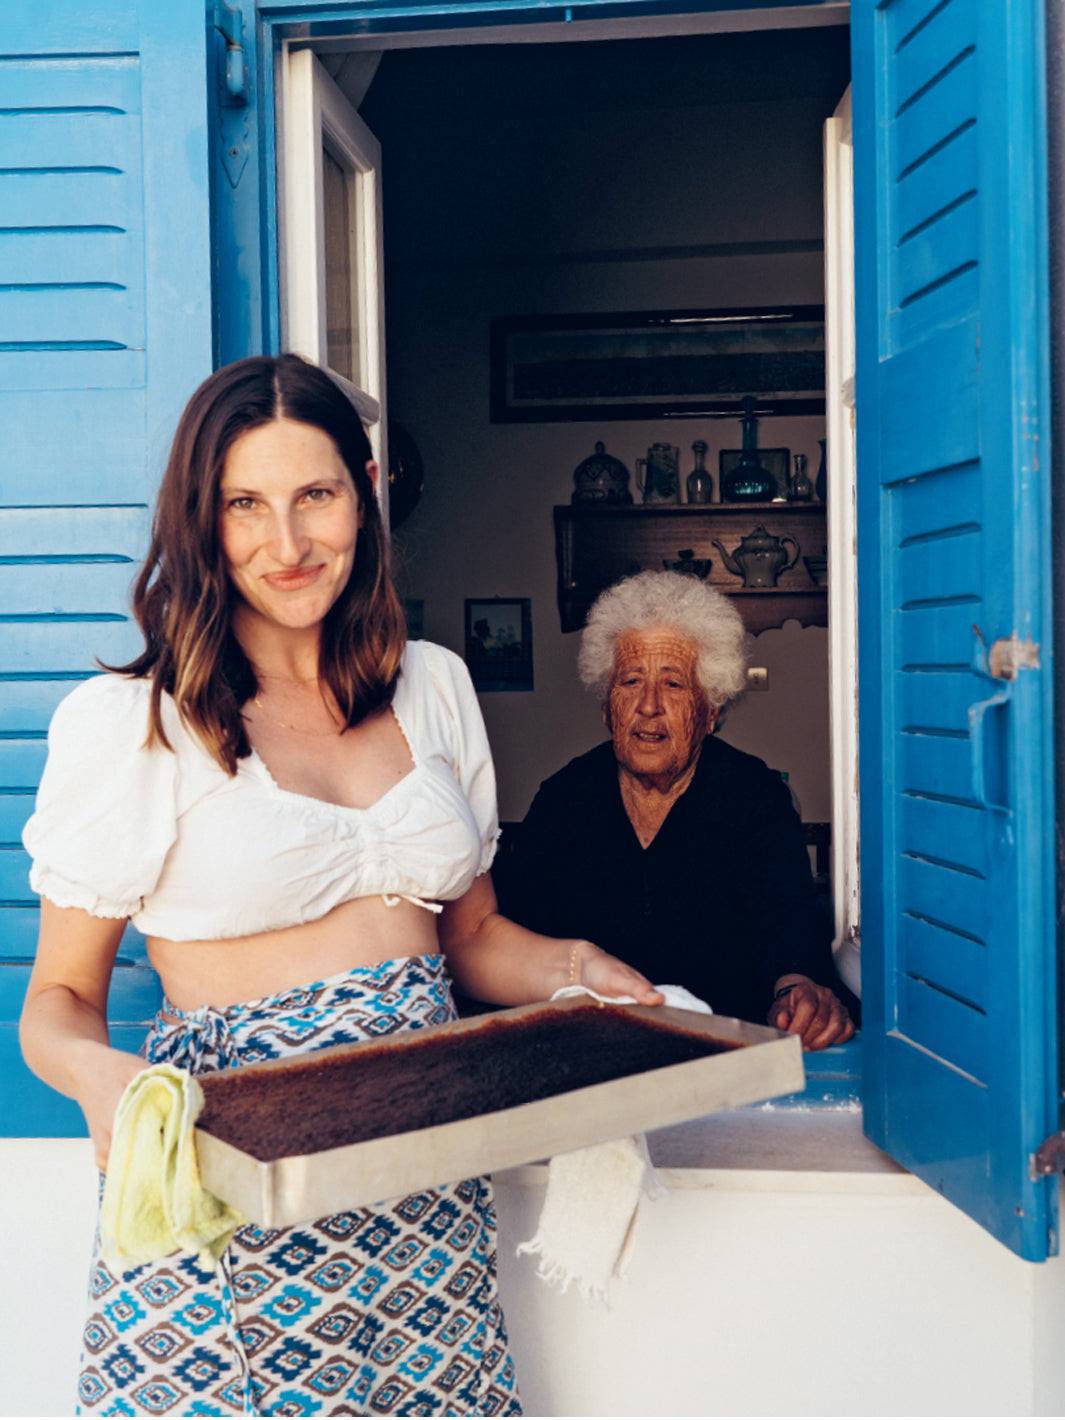 Yiayia: Time-perfected Recipes from Greece's Grandmothers